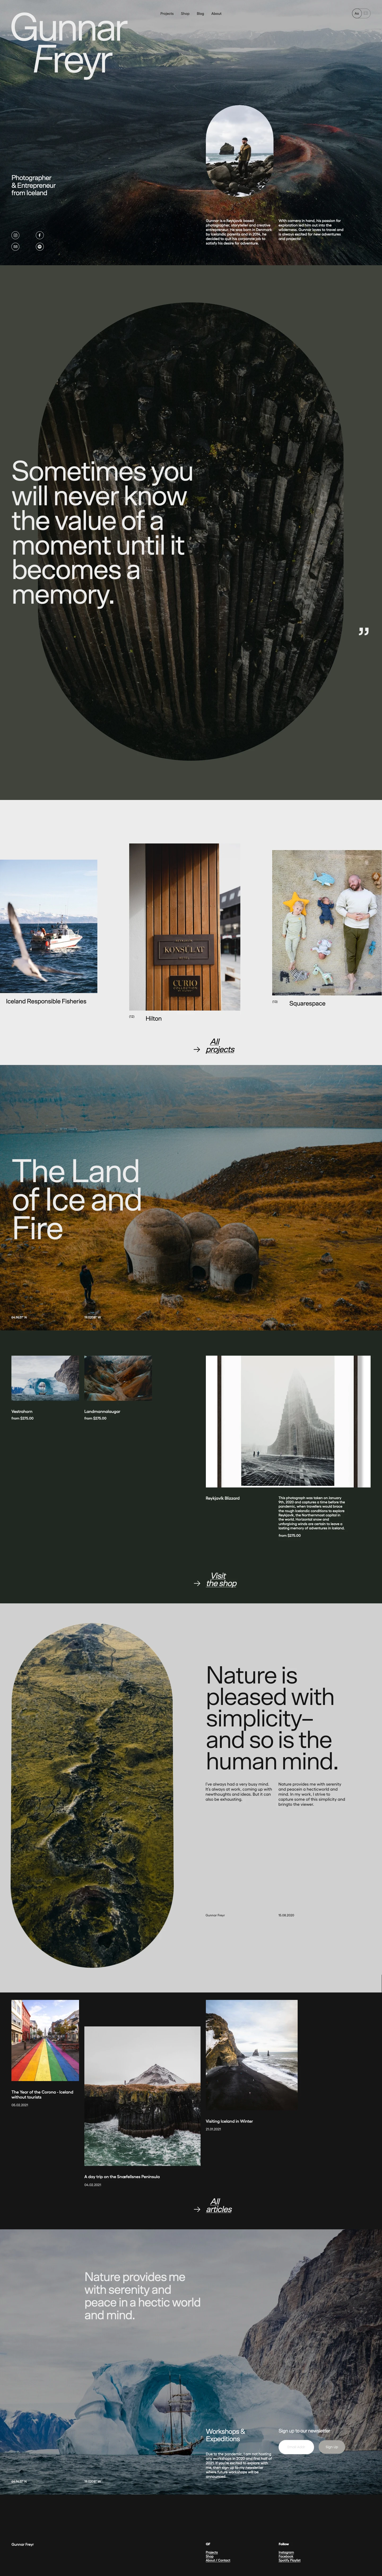 Gunnar Freyr Landing Page Example: Gunnar is a Reykjavik based photographer, storyteller and creative entrepreneur. He was born in Denmark by Icelandic parents and in 2014, he decided to quit his corporate job to satisfy his desire for adventure. With camera in hand, his passion for exploration led him out into the wilderness. Gunnar loves to travel and is always excited for new adventures and projects!